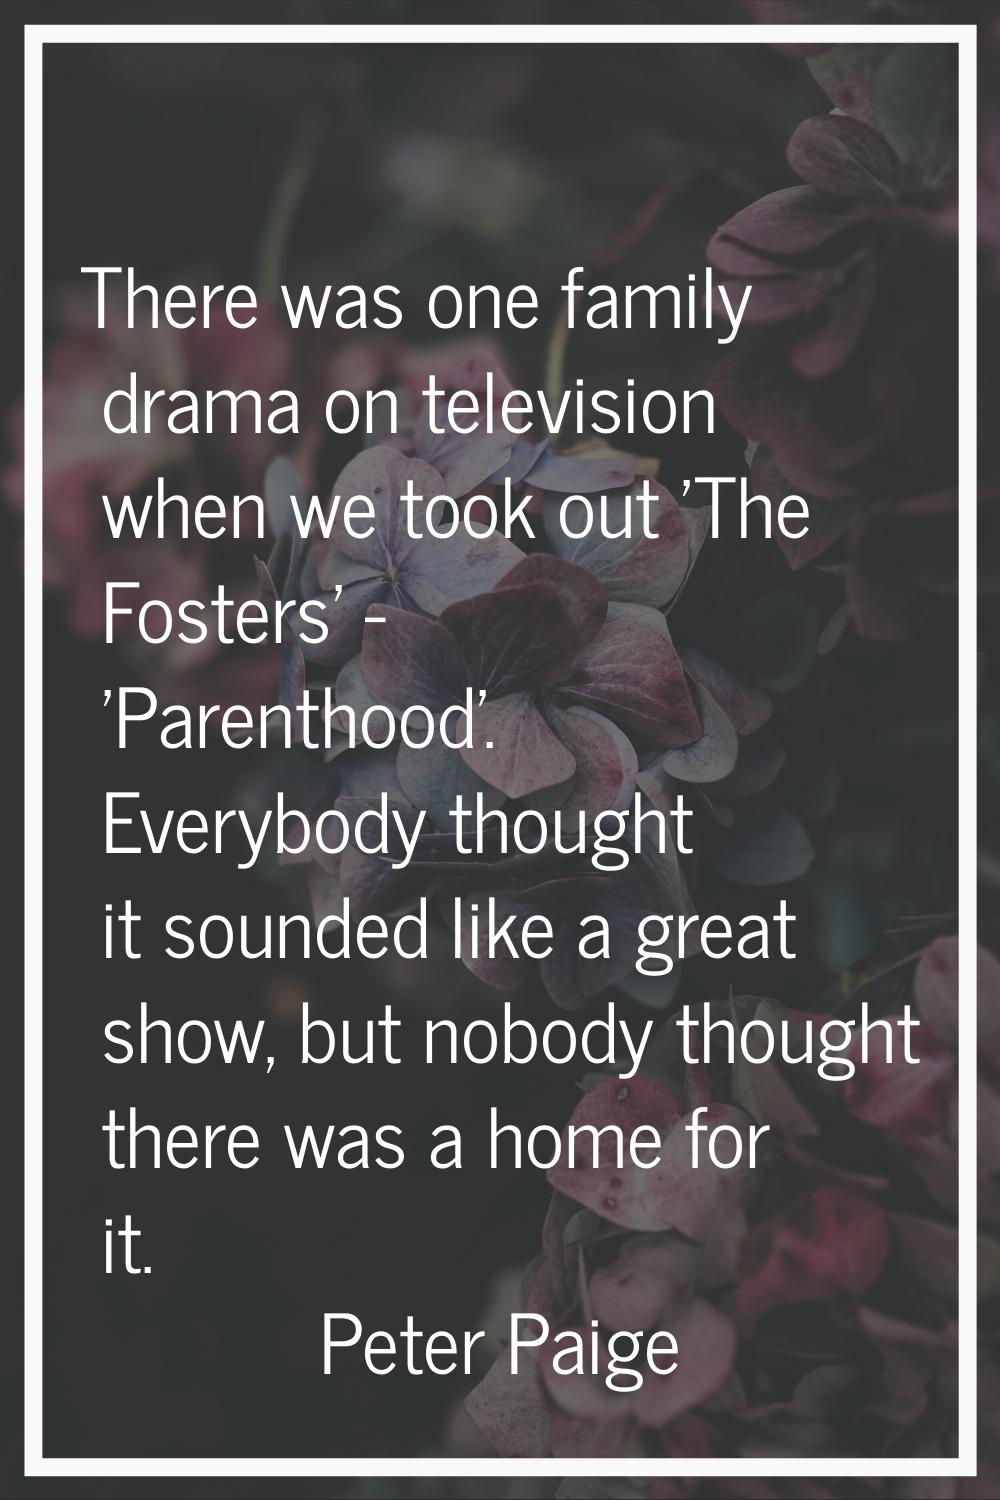 There was one family drama on television when we took out 'The Fosters' - 'Parenthood'. Everybody t